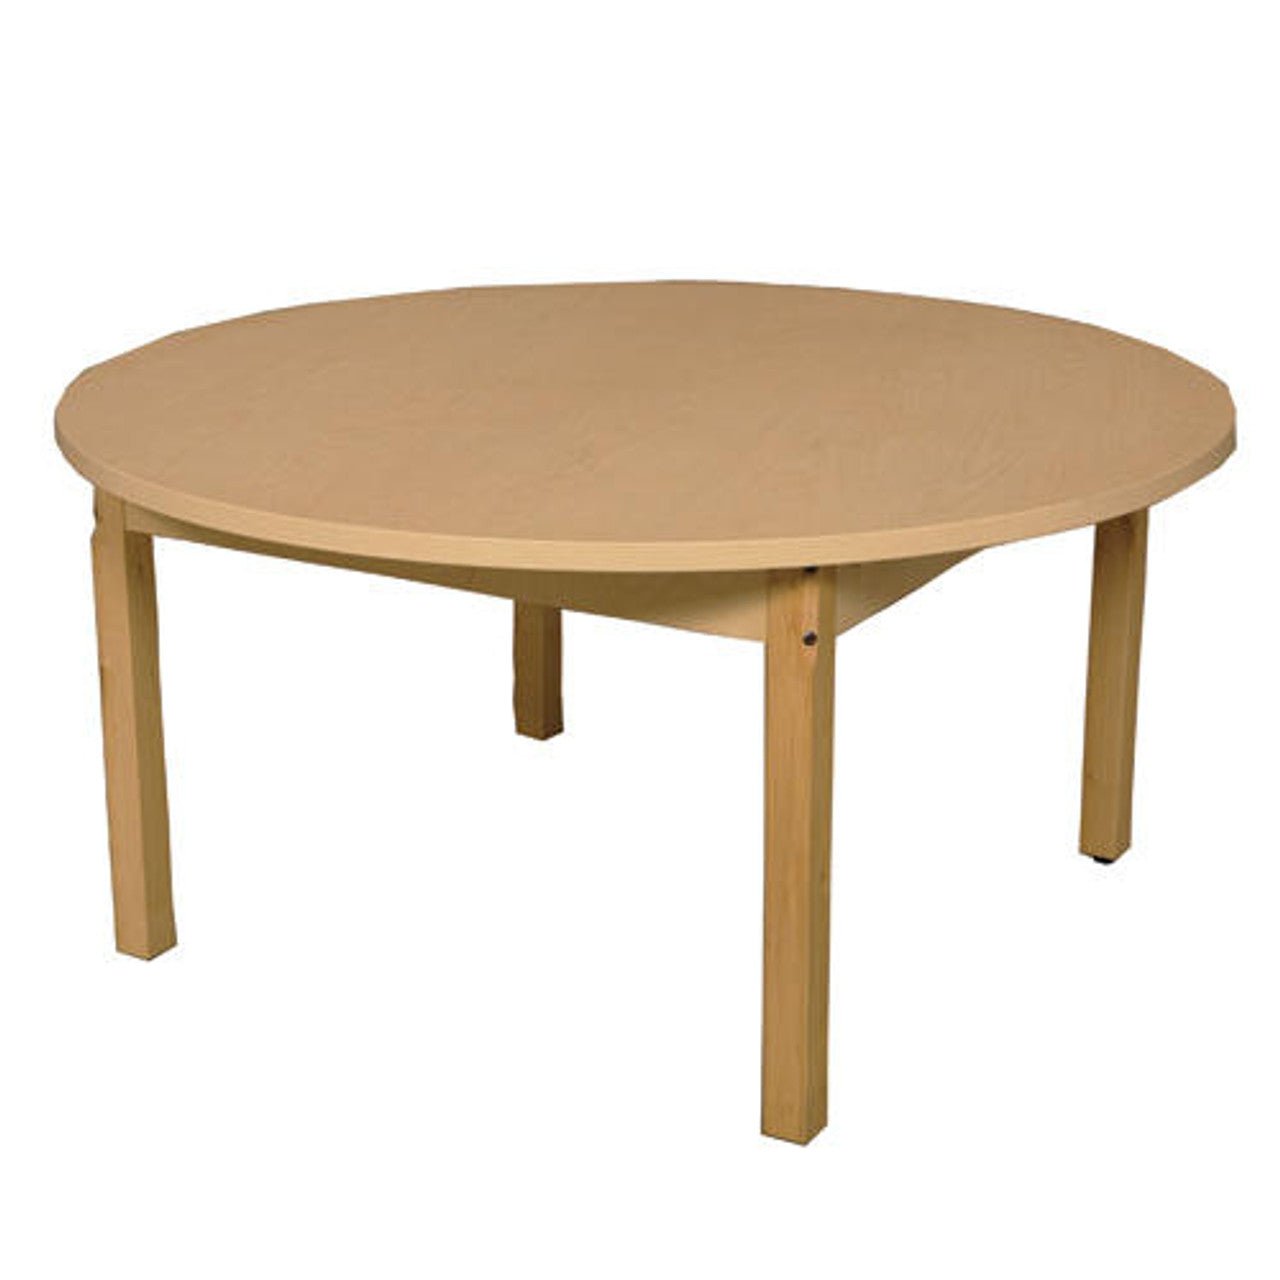 Round High Pressure Laminate Table with Hardwood Legs- 22"